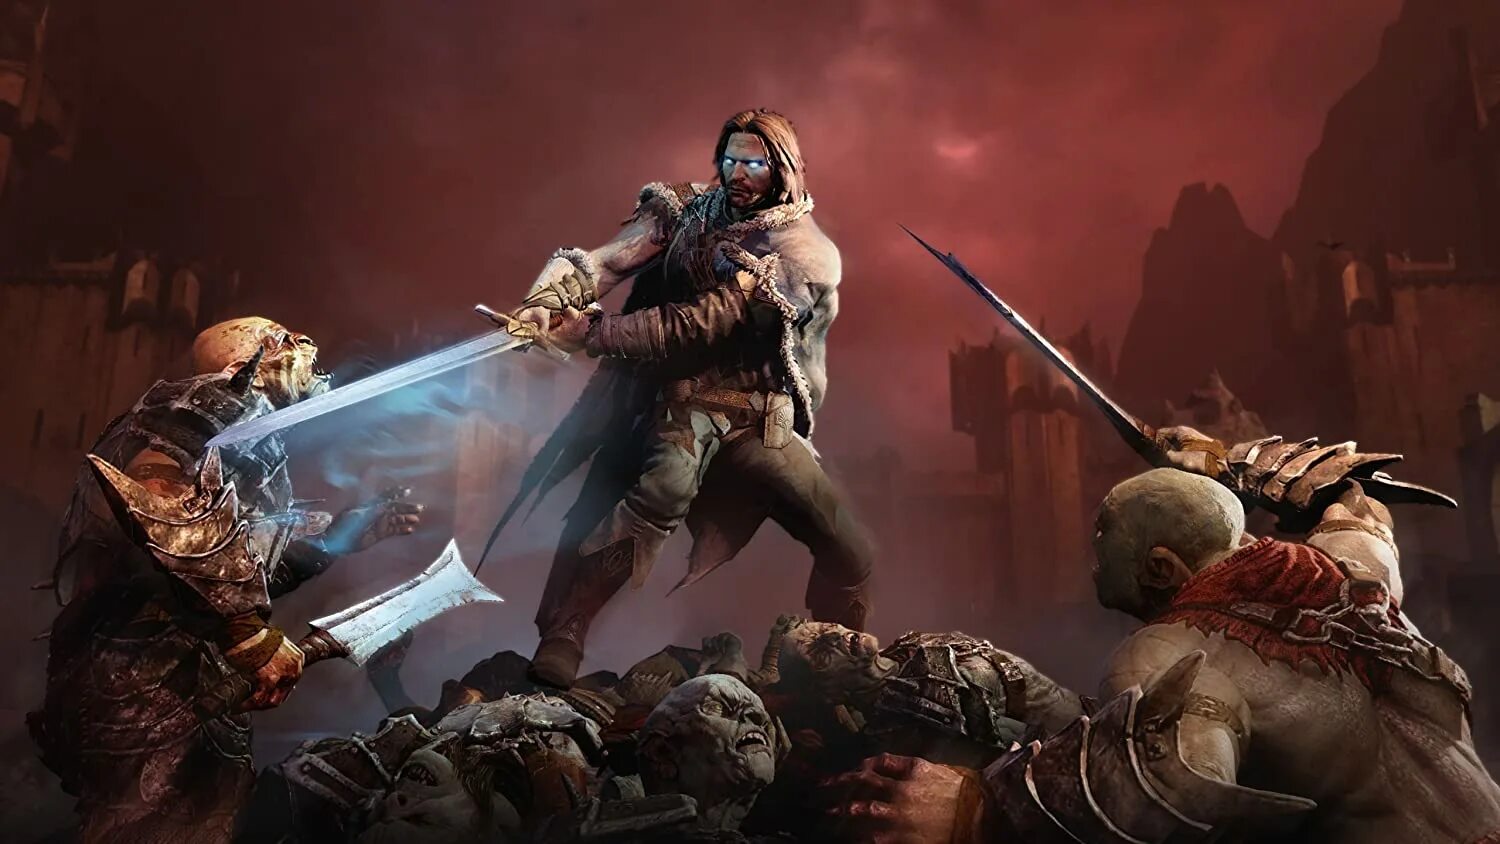 Shadow of mordor game. Middle-Earth: Shadow of Mordor. Тени Мордора ps4. Игра Средиземье тени Мордора. Средиземье: тени Мордора (ps4).